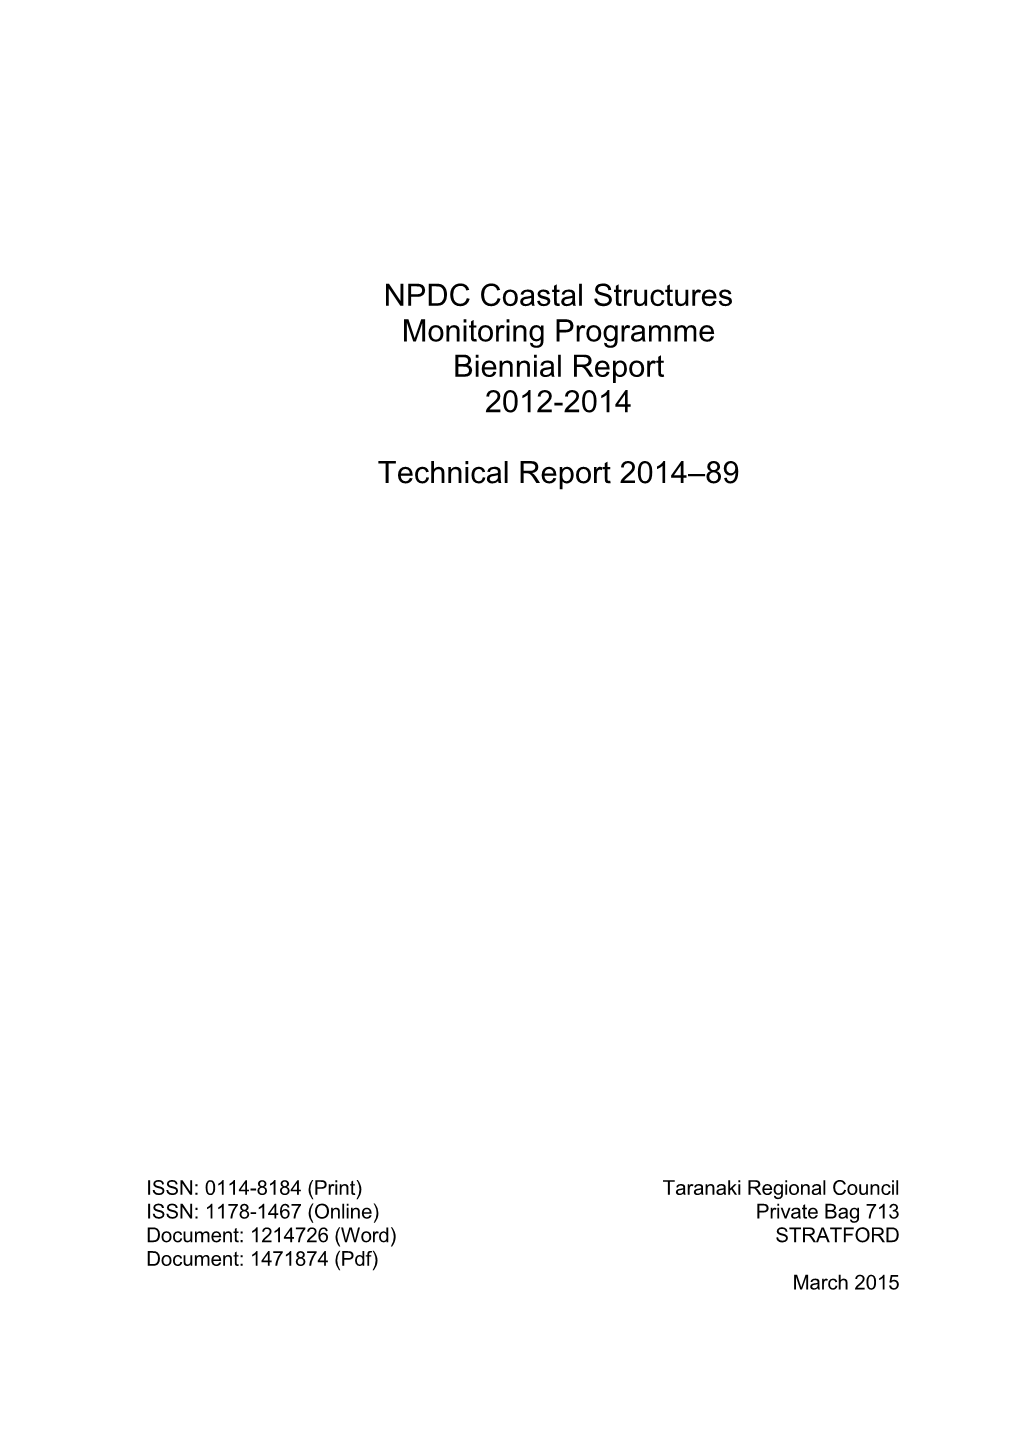 NPDC Coastal Structures Monitoring Report